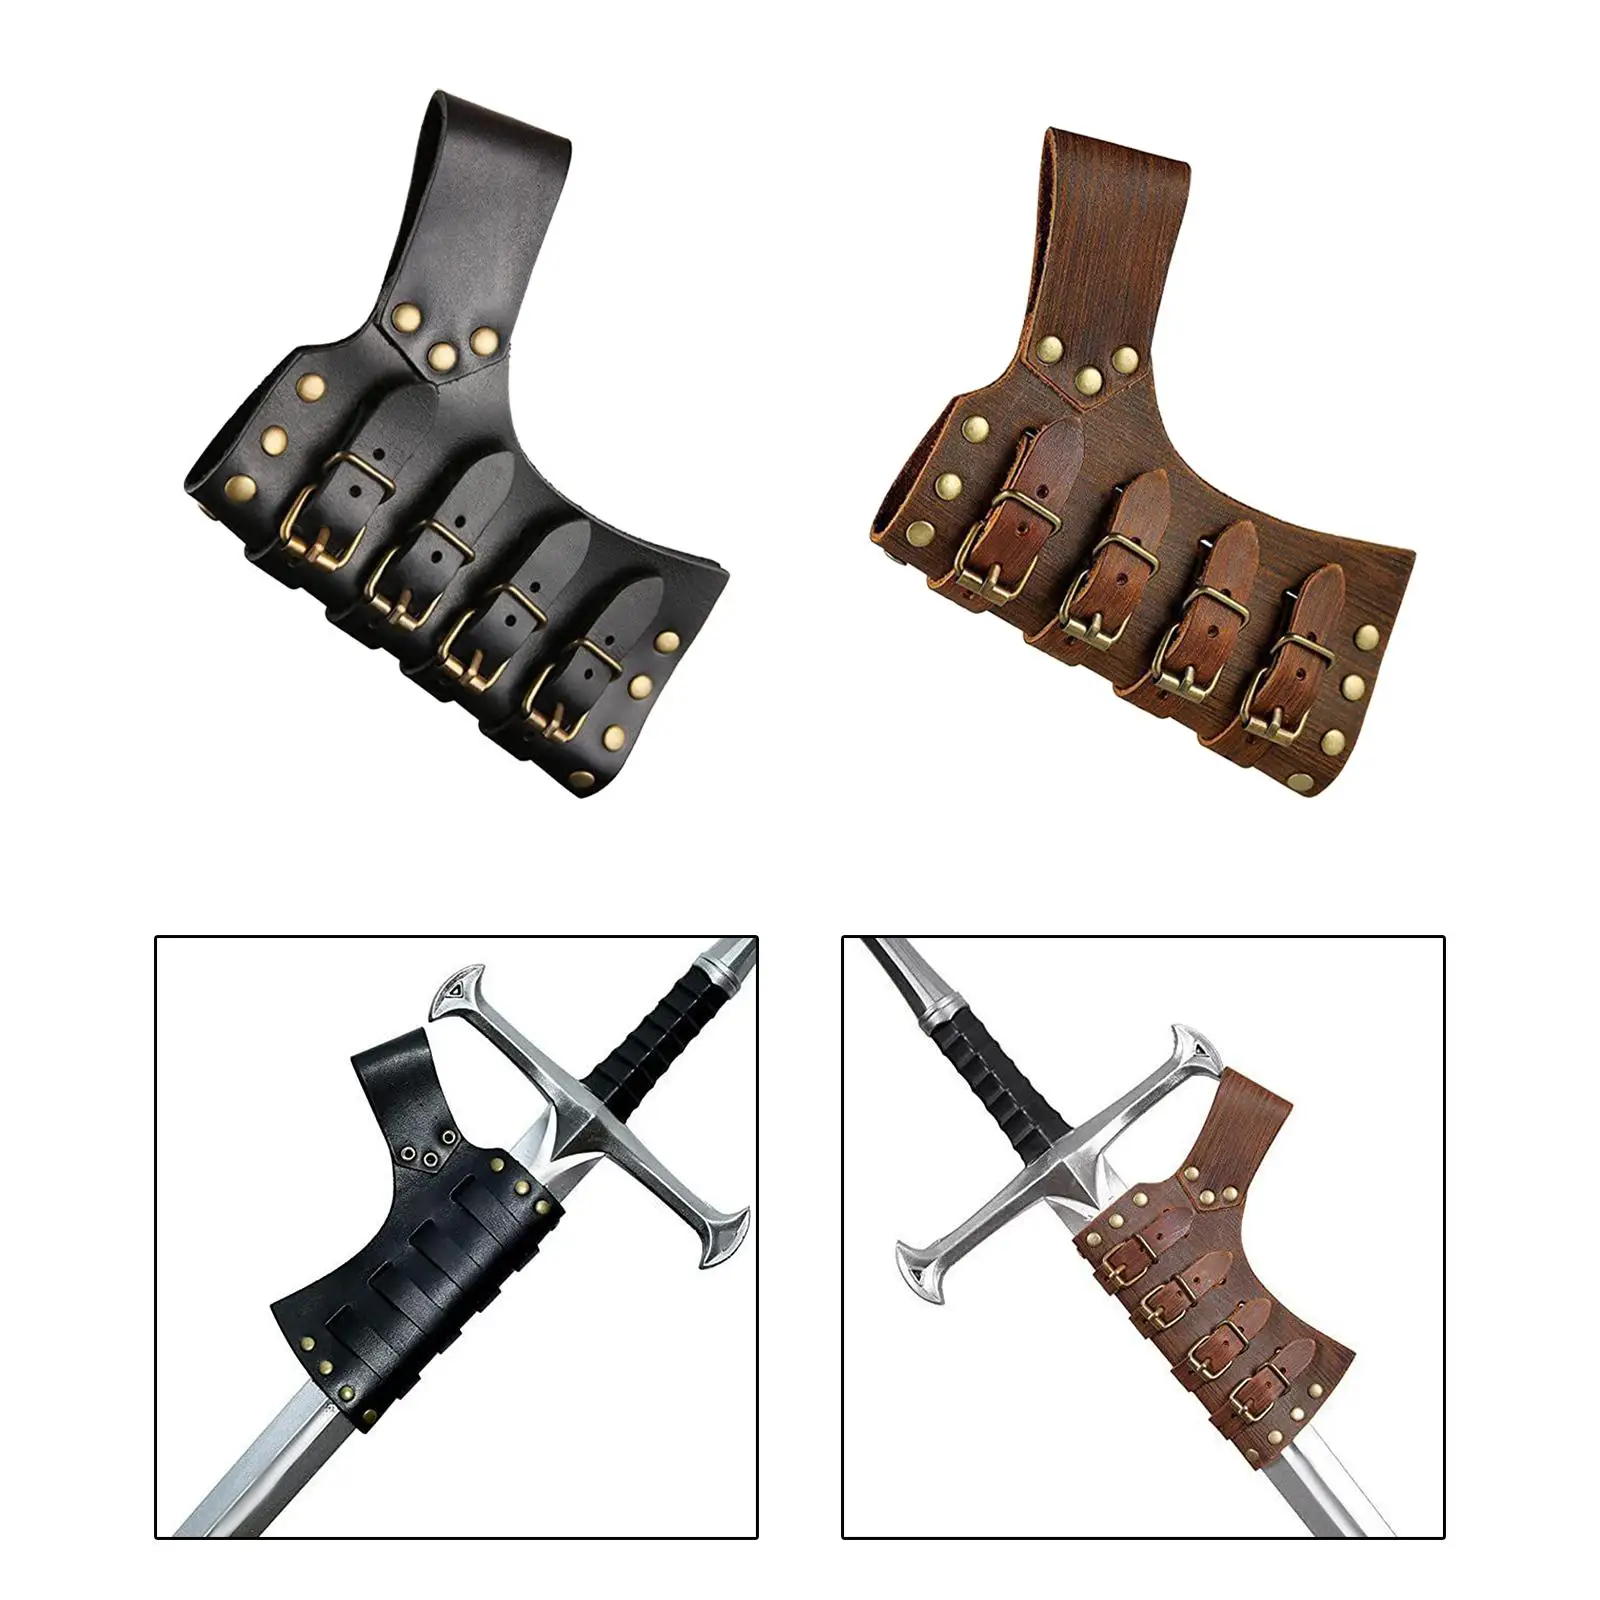 Medieval Sword Frog Knight Costume Accessories Retro Style Leather Sword Belt Sword Sheath Sword Holder for Theme Party